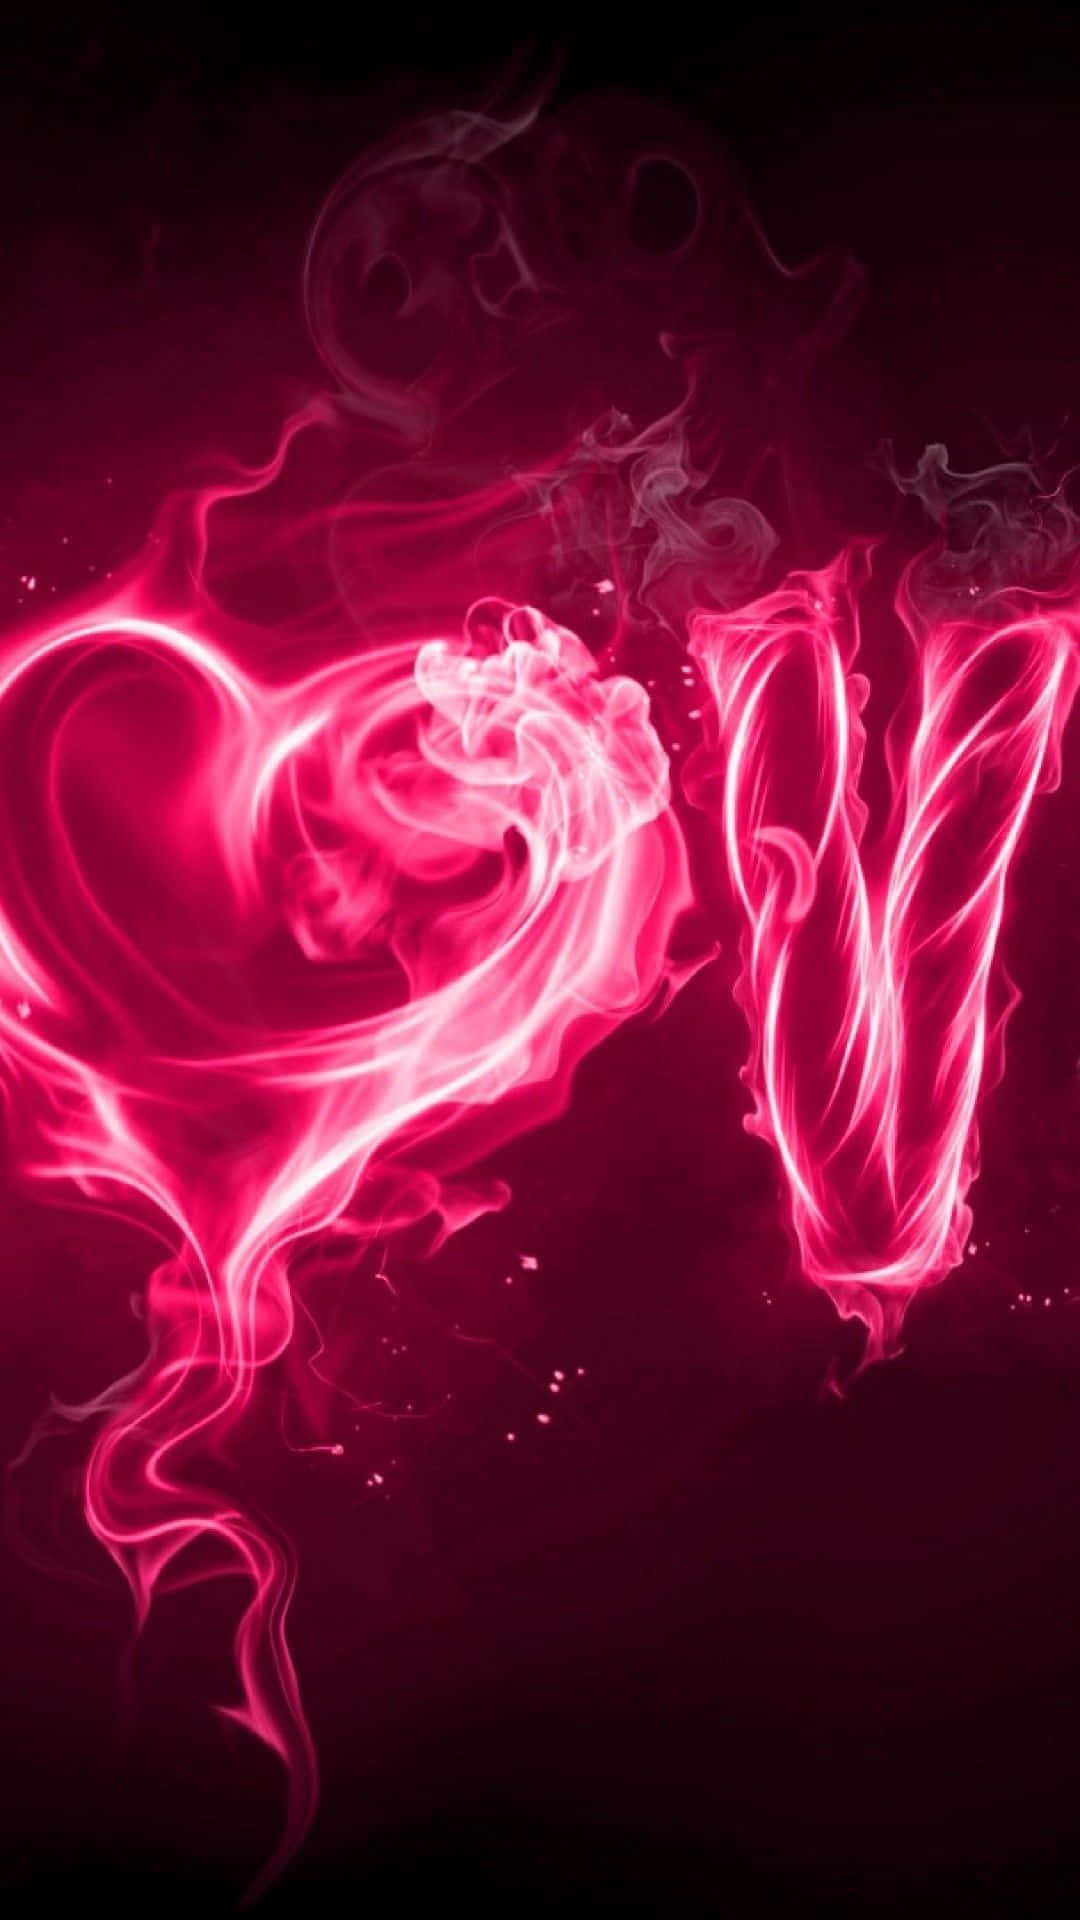 Love Wallpapers Hd - Hd Wallpapers Background